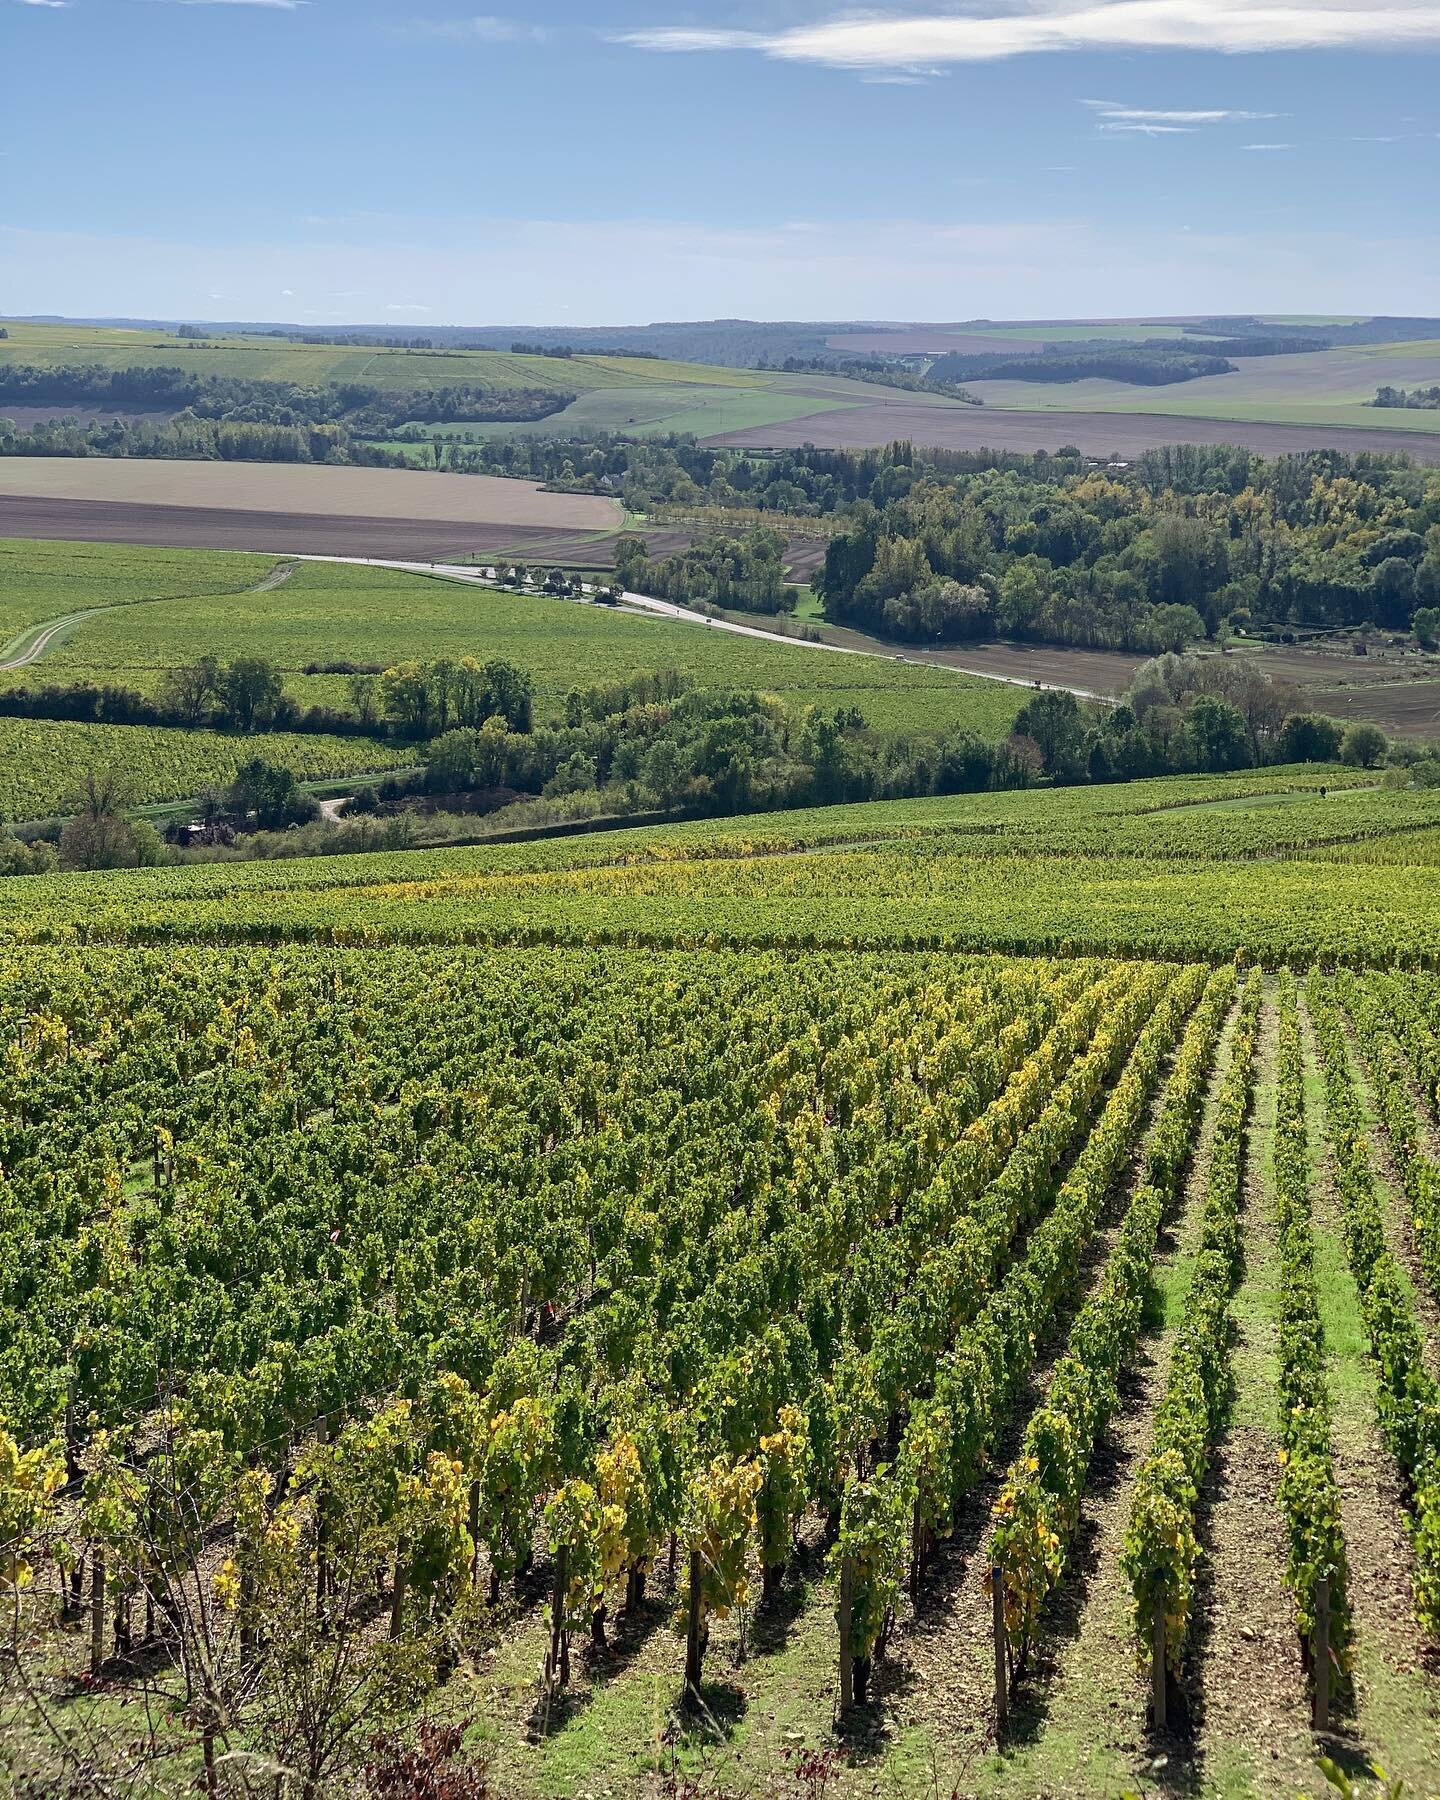 Founded by Burgundian monks in the 12th century, #Chablis is famous the world over for its delicate and delicious white wines. 
&bull;	
&bull; 
&bull; 
#vineyard #burgundywine #winery #winelover #winetasting #vino #winetime #winelovers #winestagra